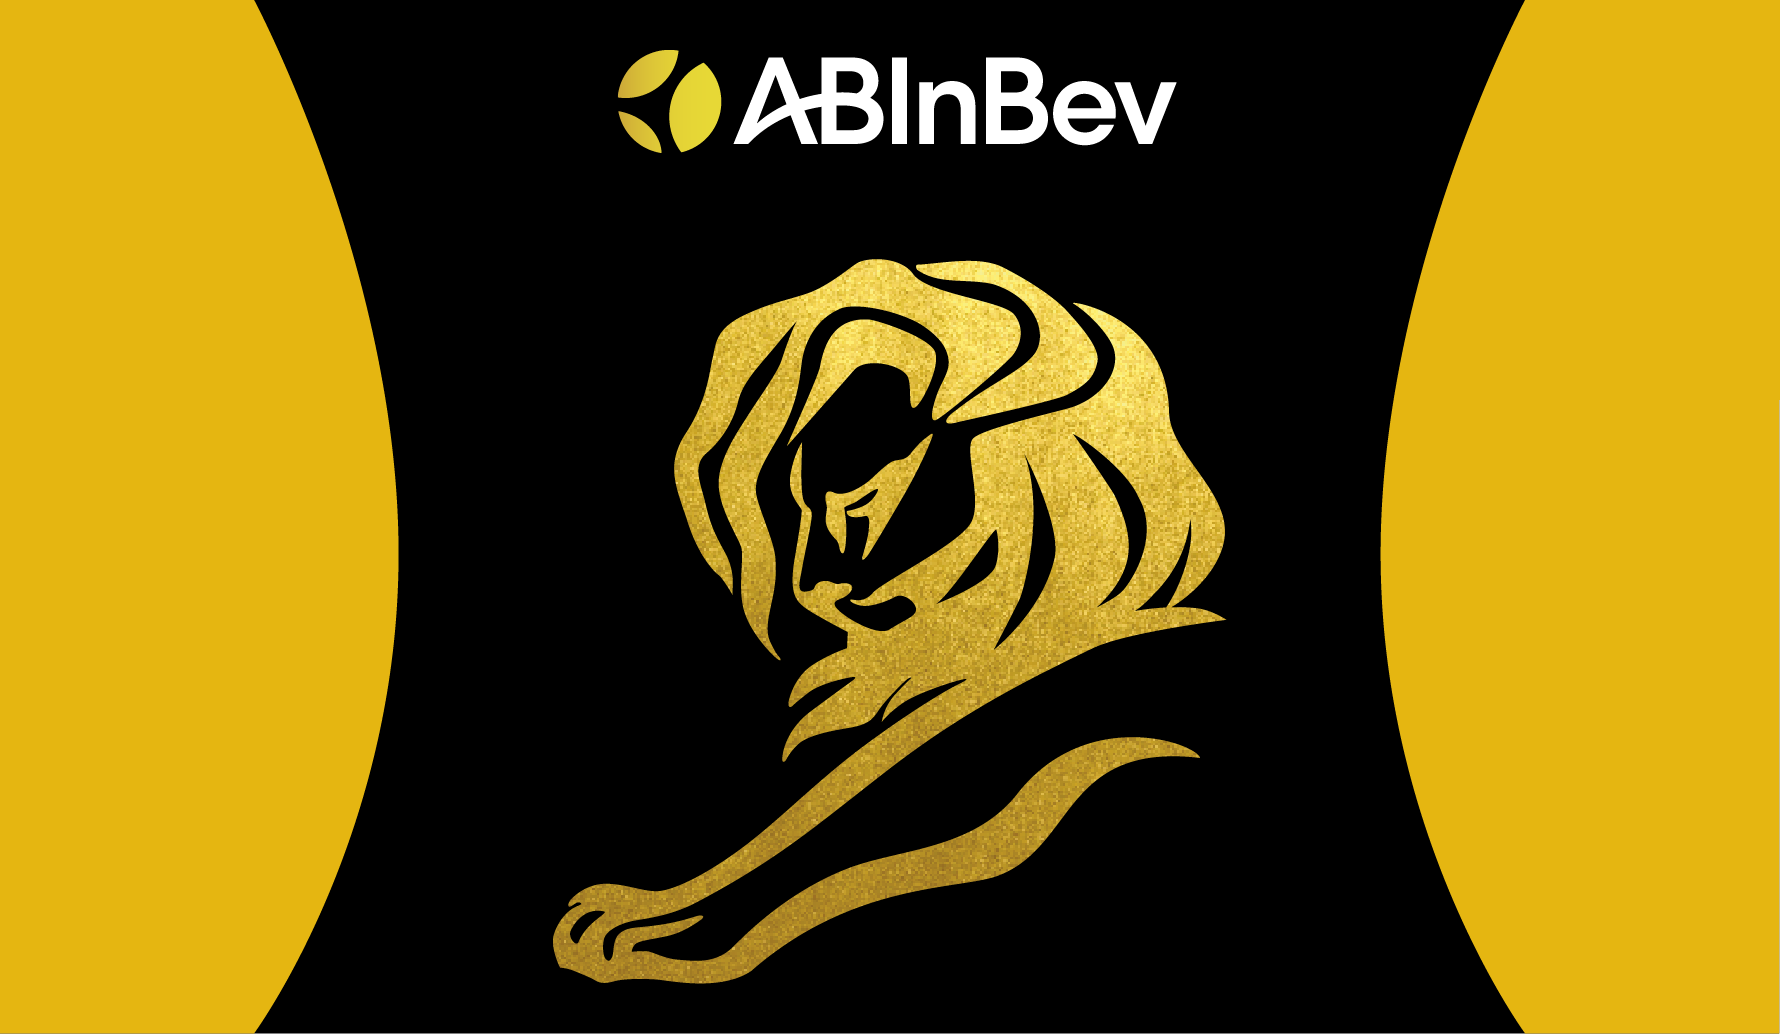 AB InBev returns to Cannes Lions International Festival of Creativity to learn and be inspired